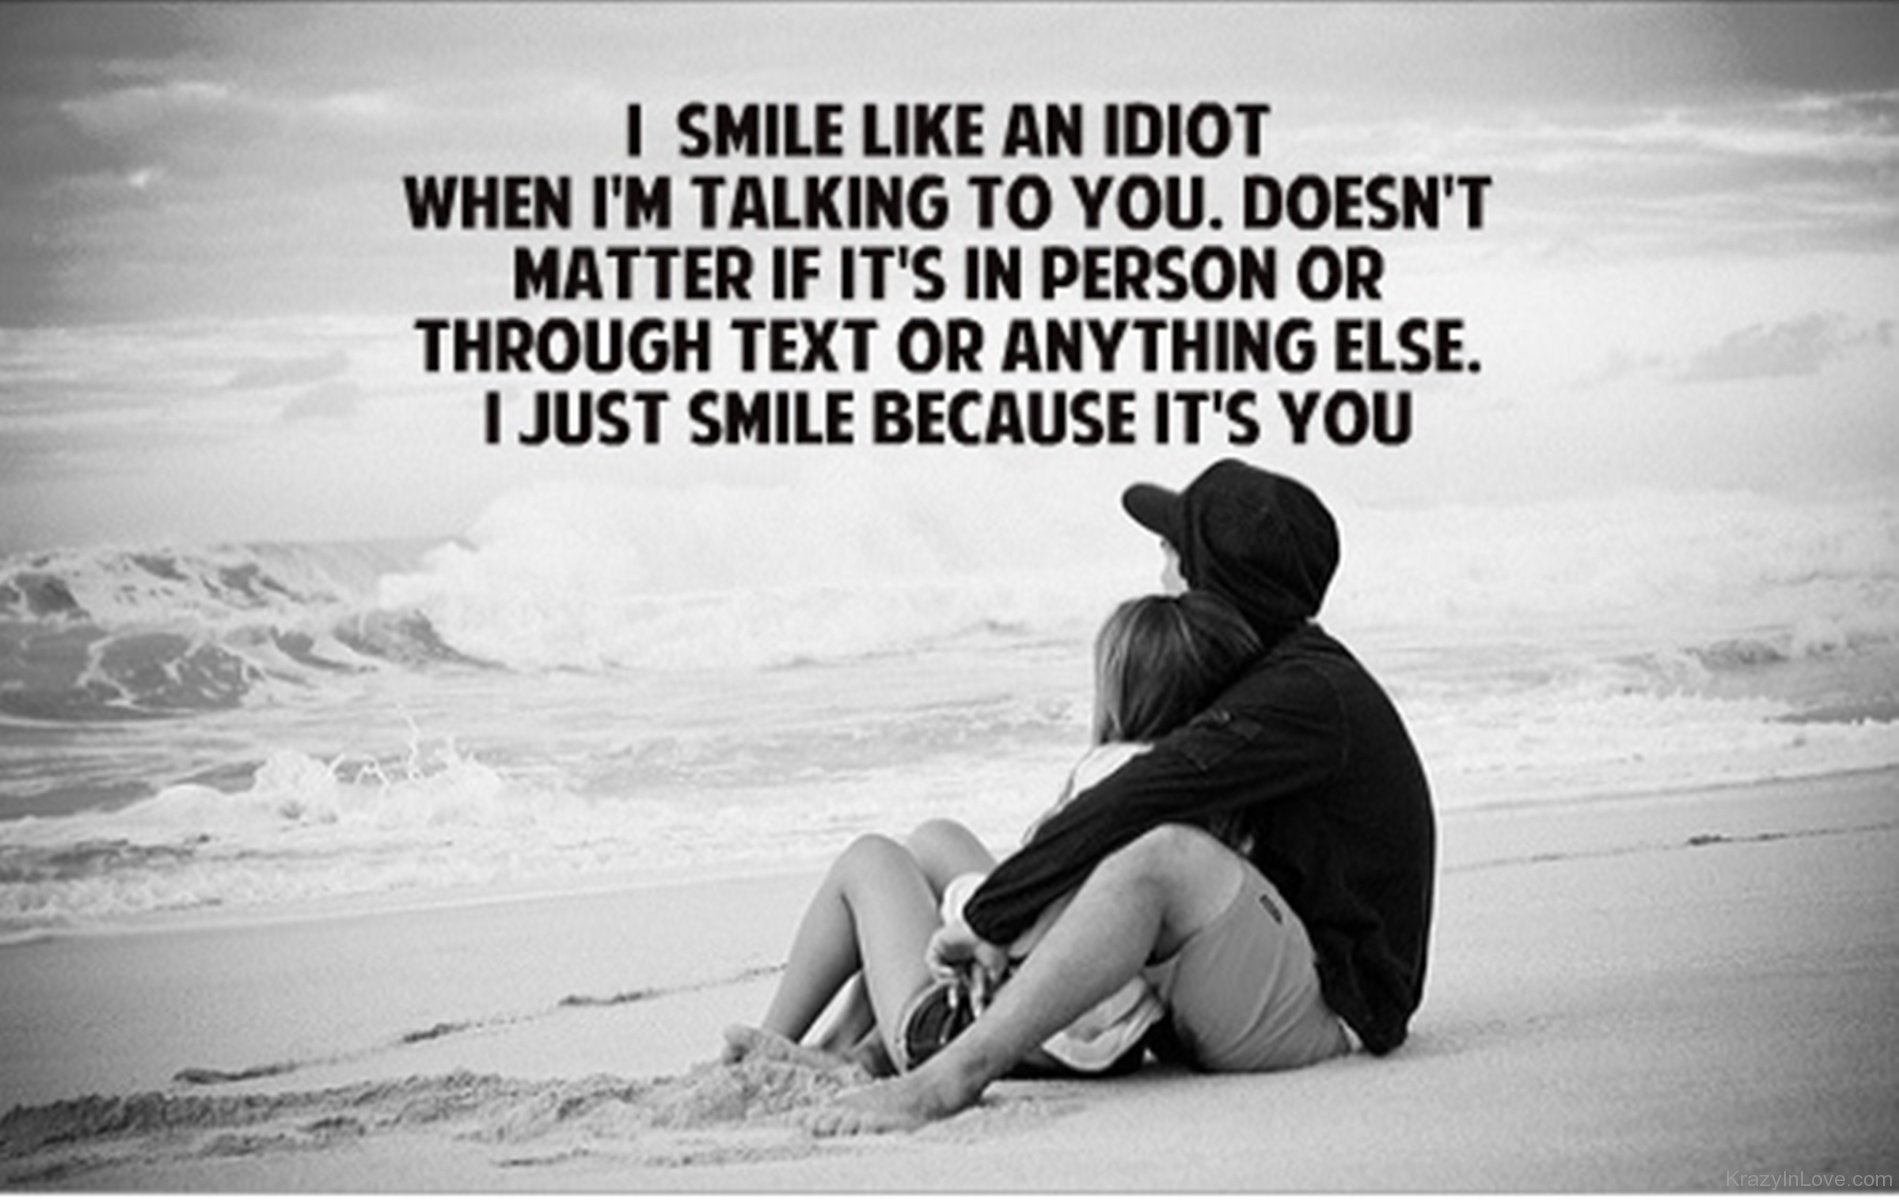 I smile like an idiot 😏♥️ … #smile #querky #love #loveyou #lovequotes  #lovesayings #sayingsandquotes #couples #relationships